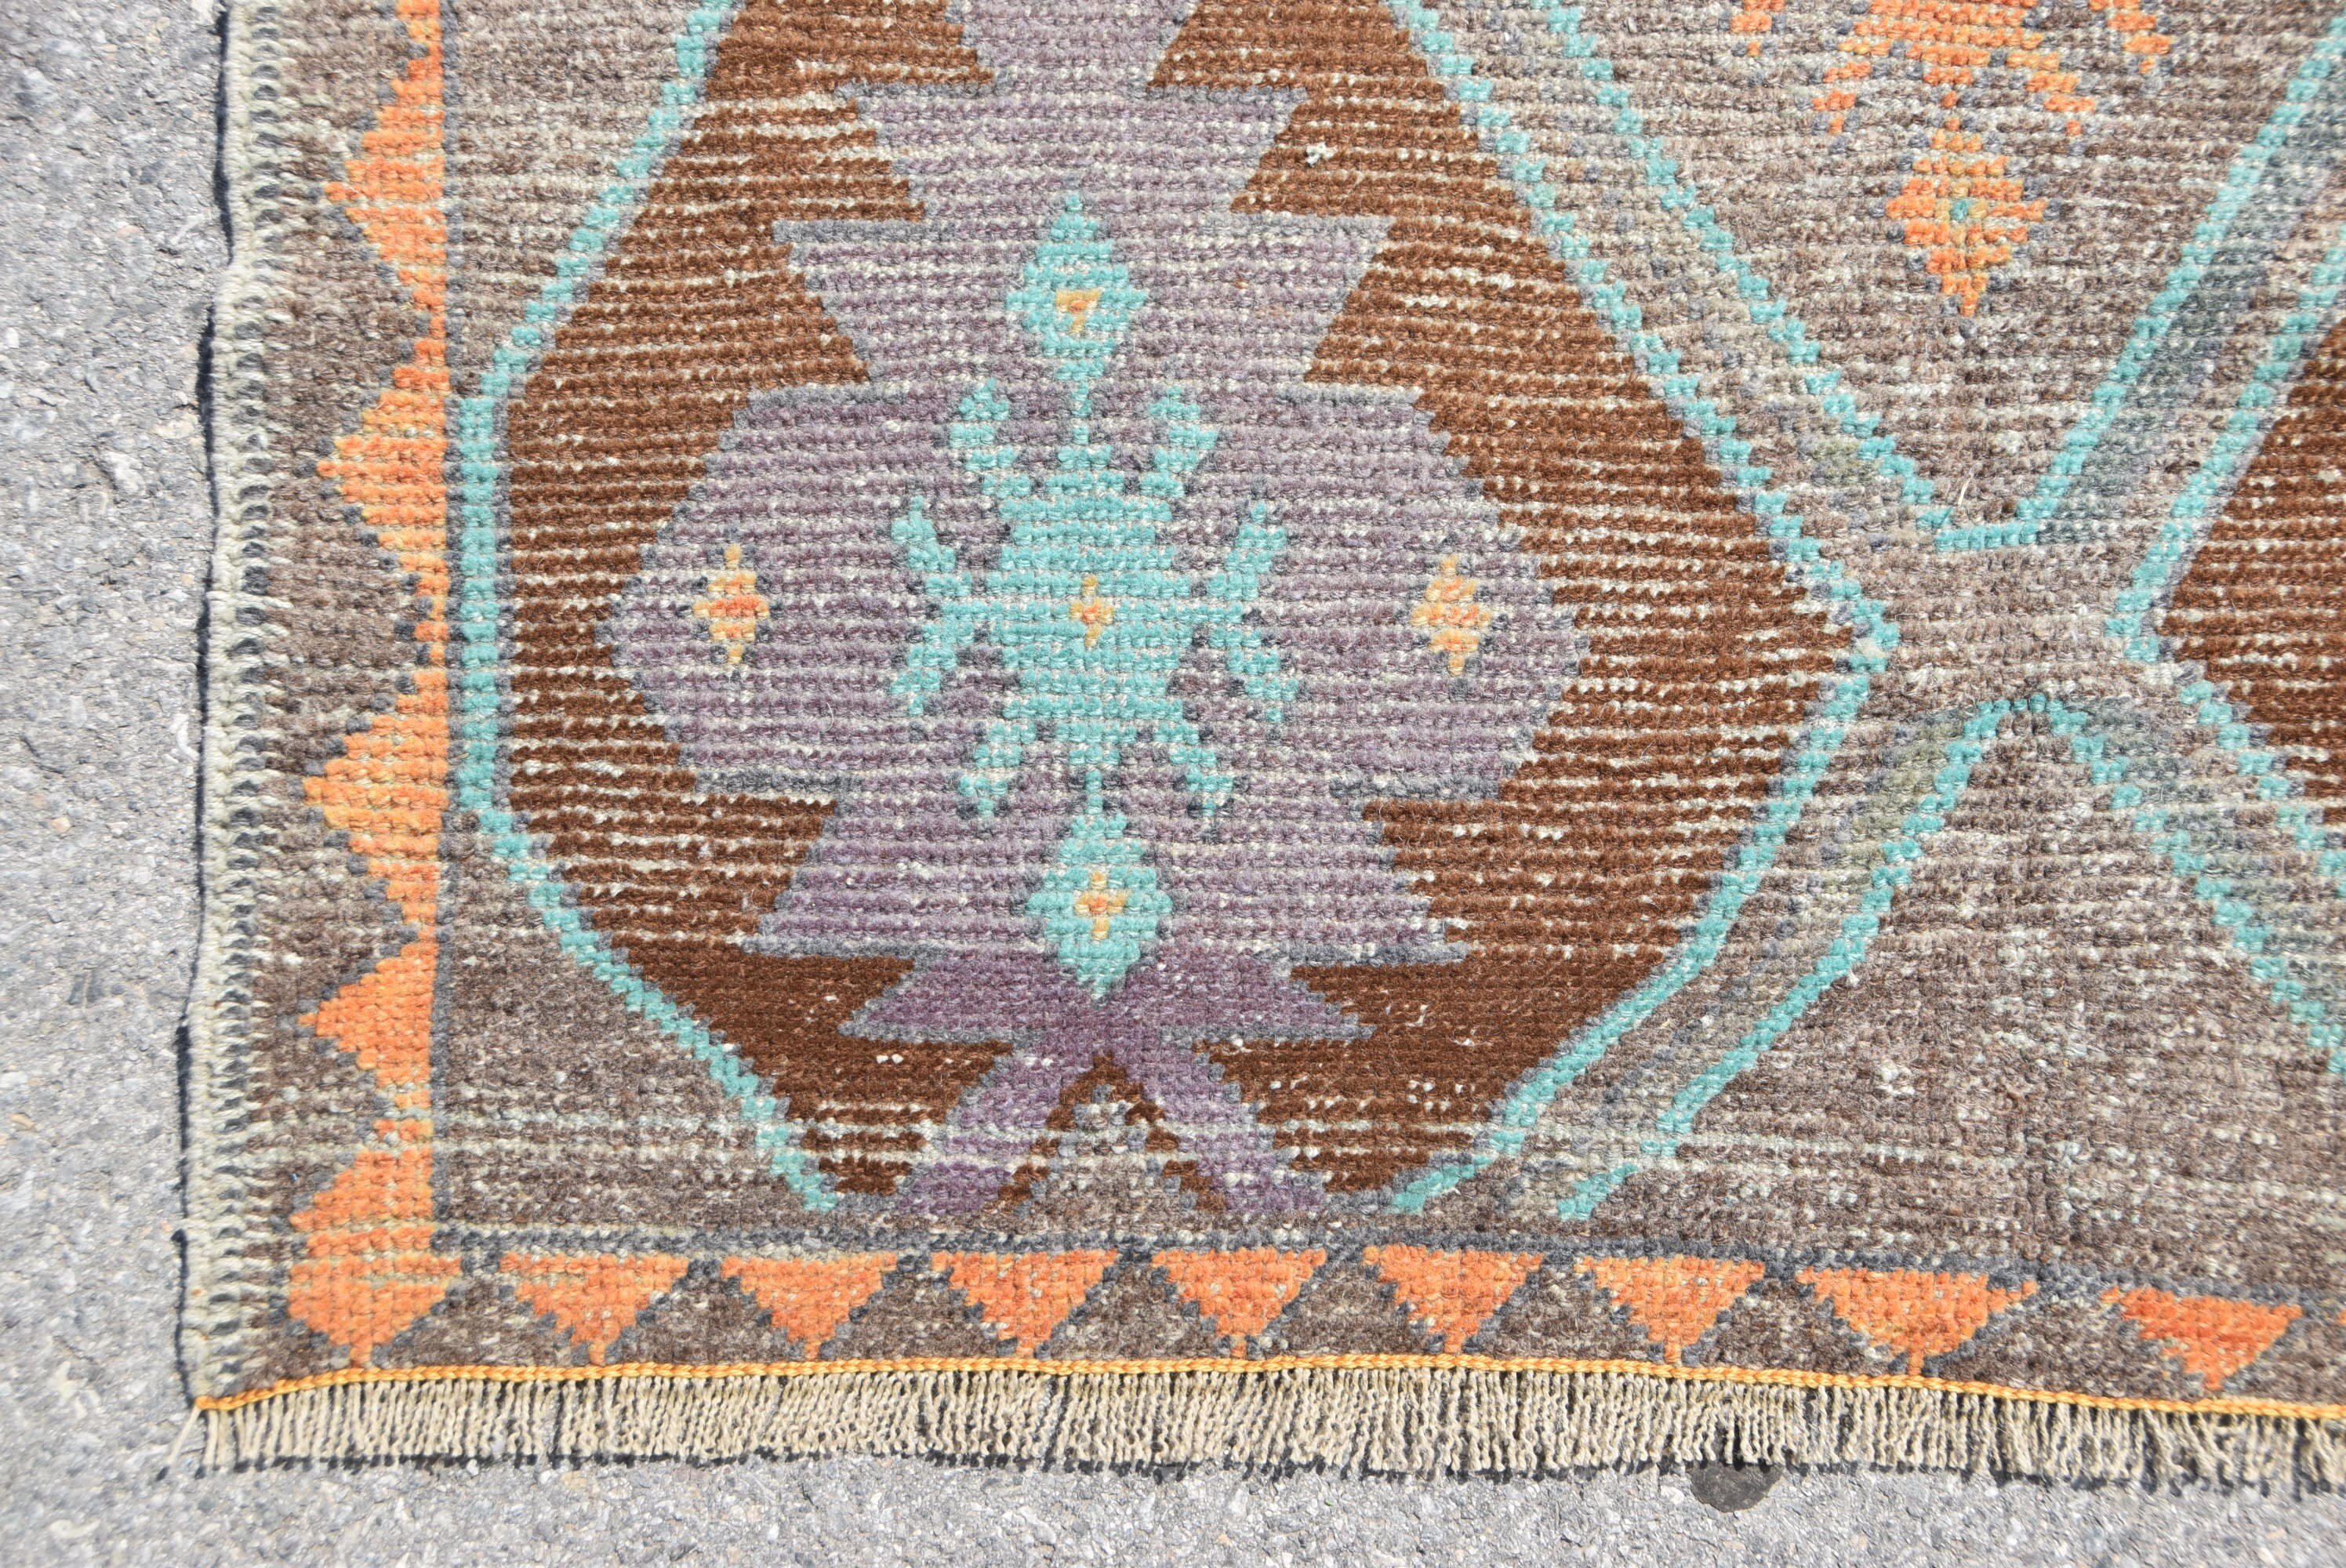 Kitchen Rug, Brown Wool Rugs, Anatolian Rugs, Rugs for Kitchen, Bedroom Rug, Cute Rugs, 3.3x6.1 ft Accent Rugs, Turkish Rug, Vintage Rugs